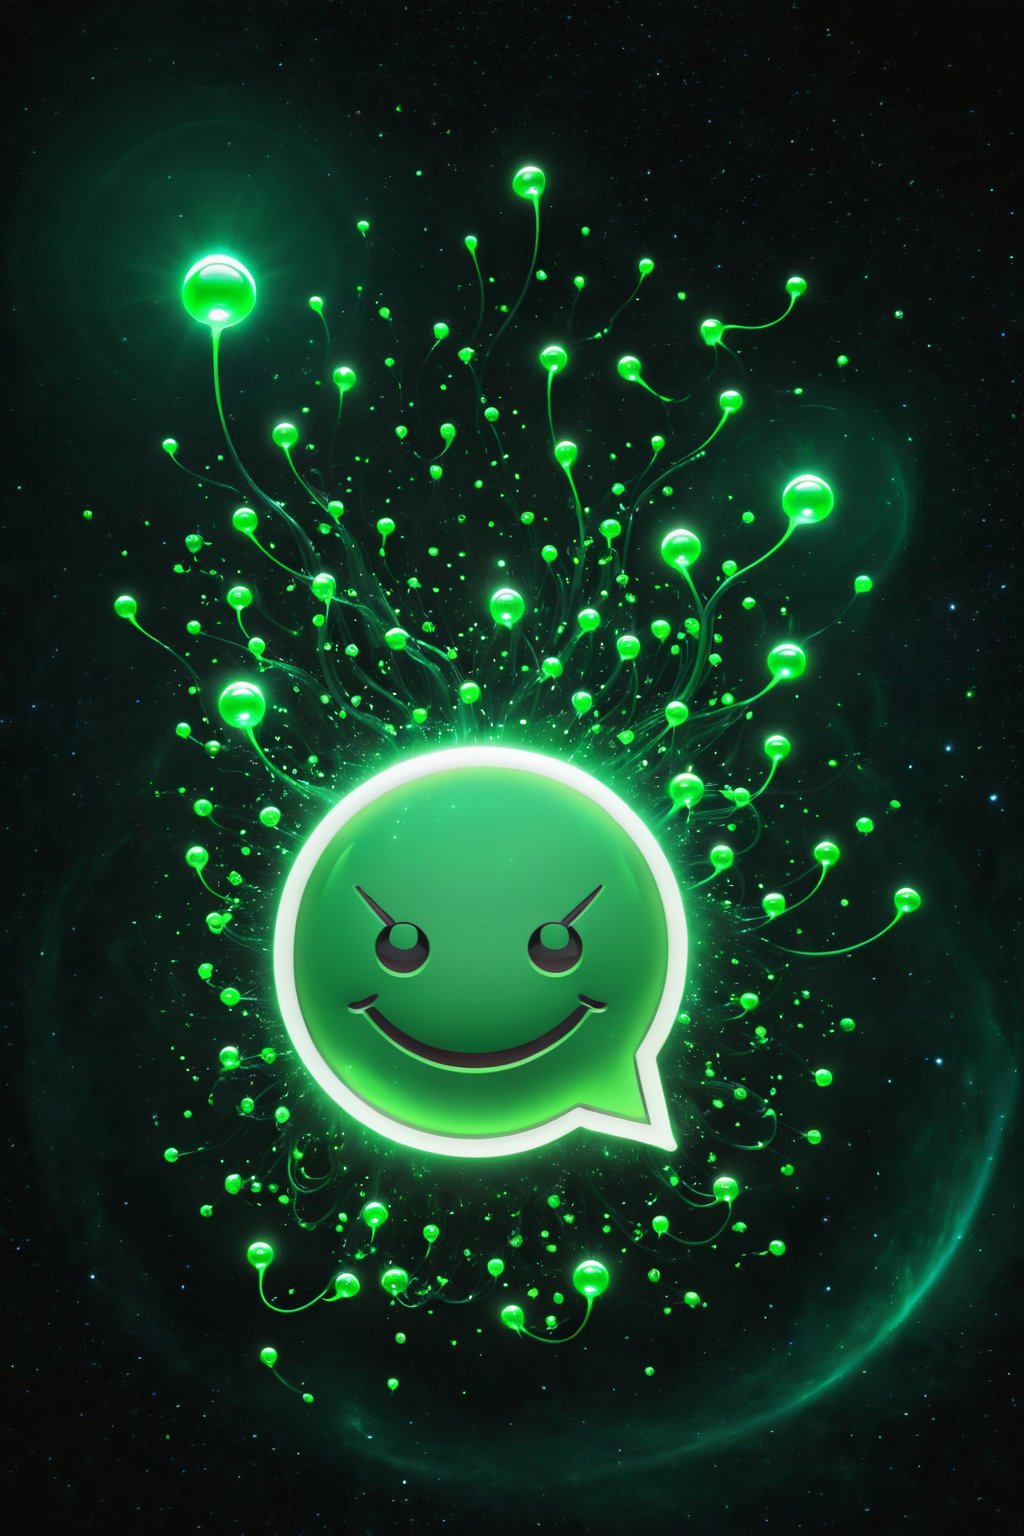 Visualize WhatsApp as an alien lifeform, a green, bioluminescent creature with antennae shaped like speech bubbles, communicating through glowing, floating orbs in a vast, dark, and interconnected space